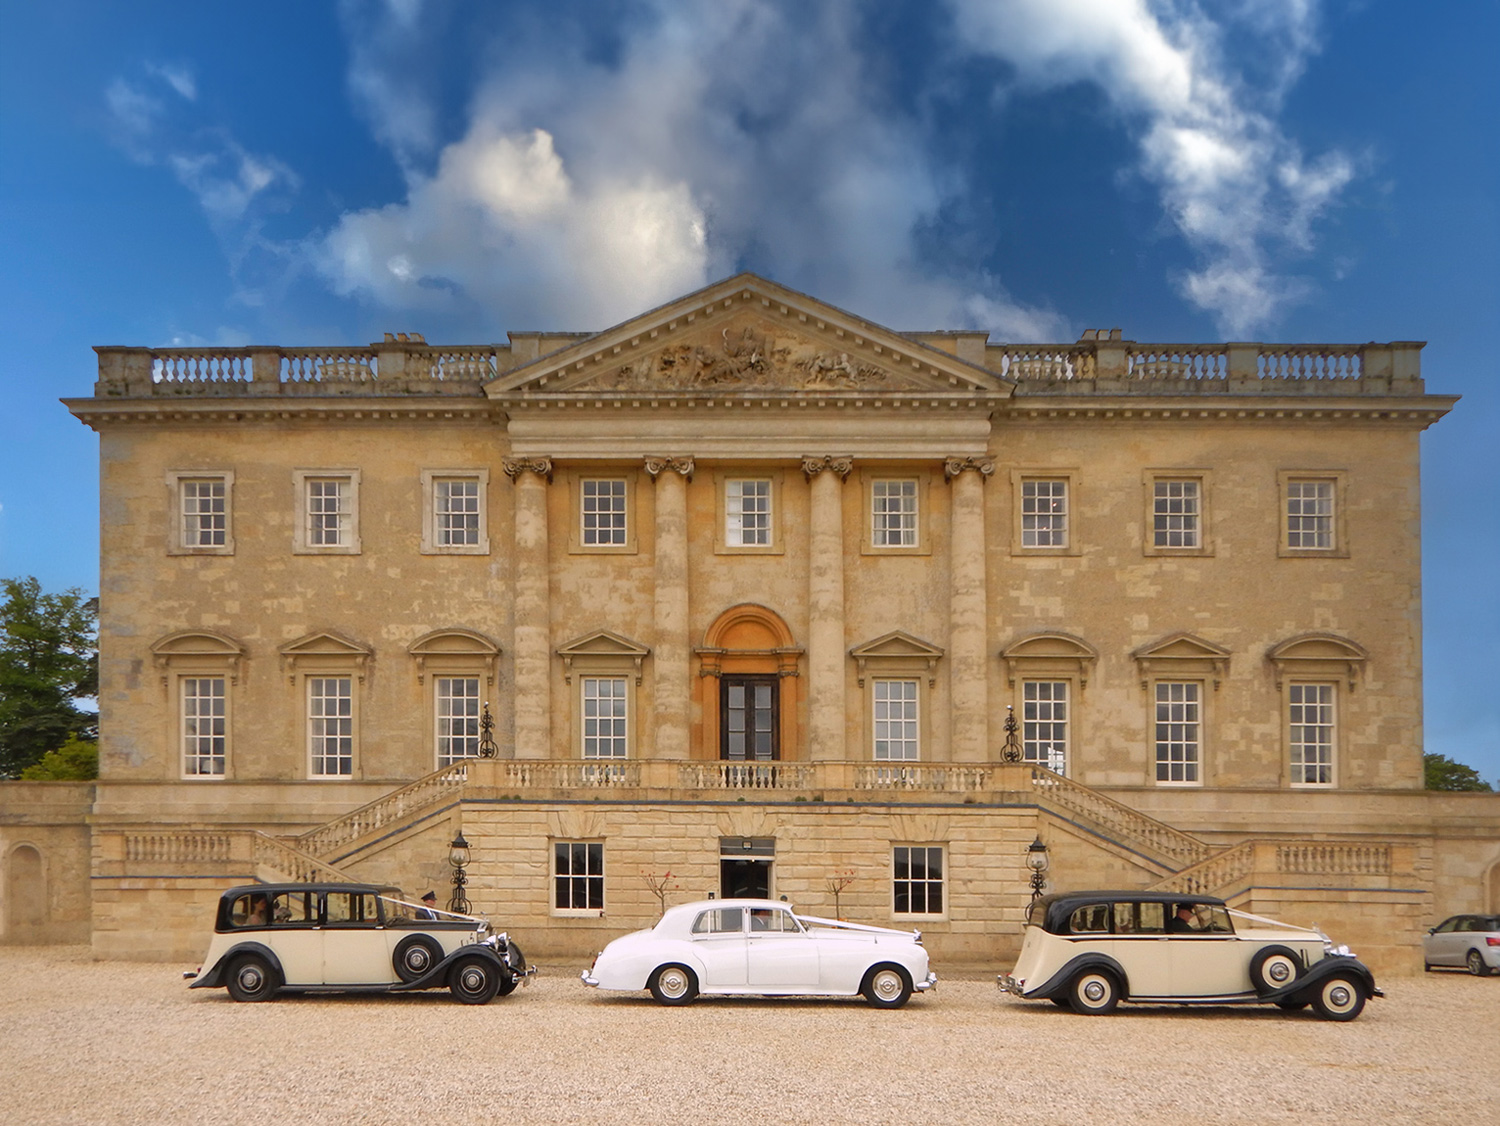 Classic cars compliment the classical architecture of Kirtlington Park for an elegant wedding